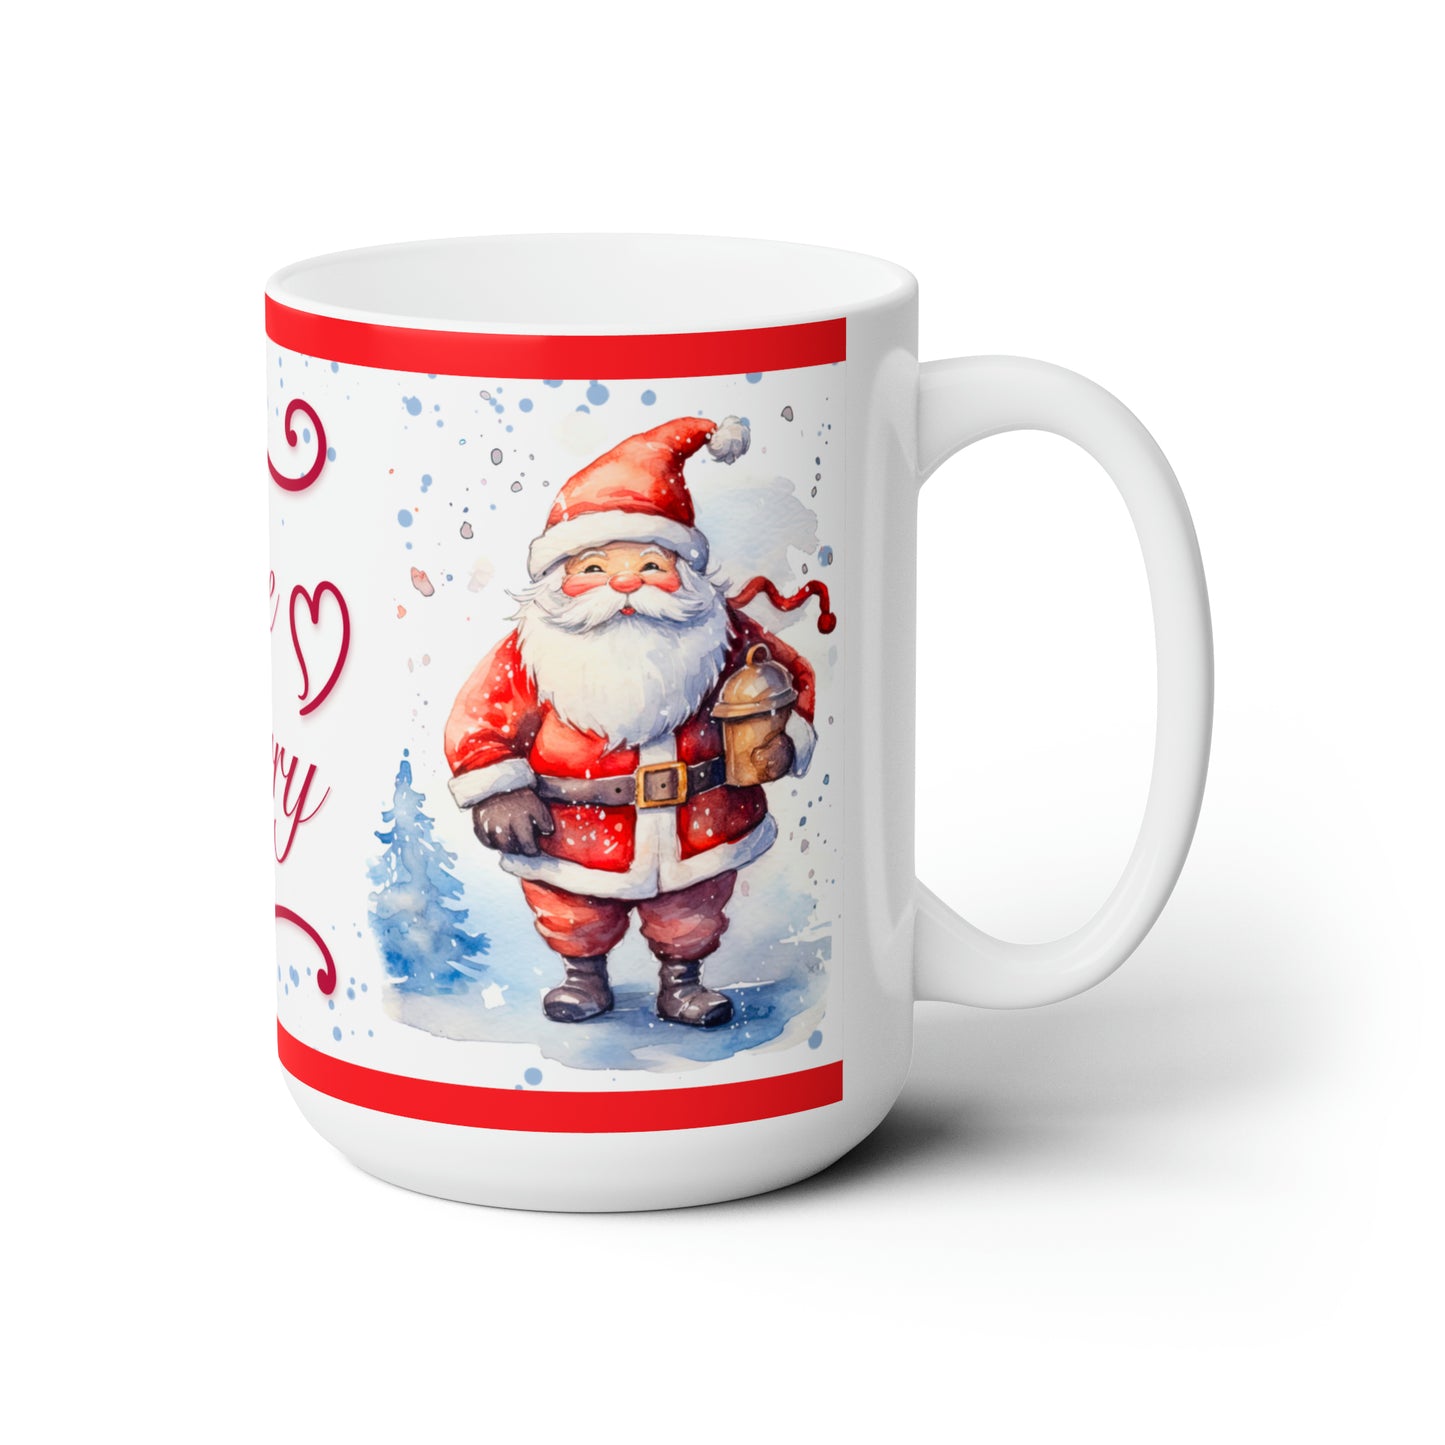 Be Marry Mug,Christmas in every sip Festive mug, perfect gift for Christmas, Christmas mugs, Mug of joy A perfect gift for this Christmas